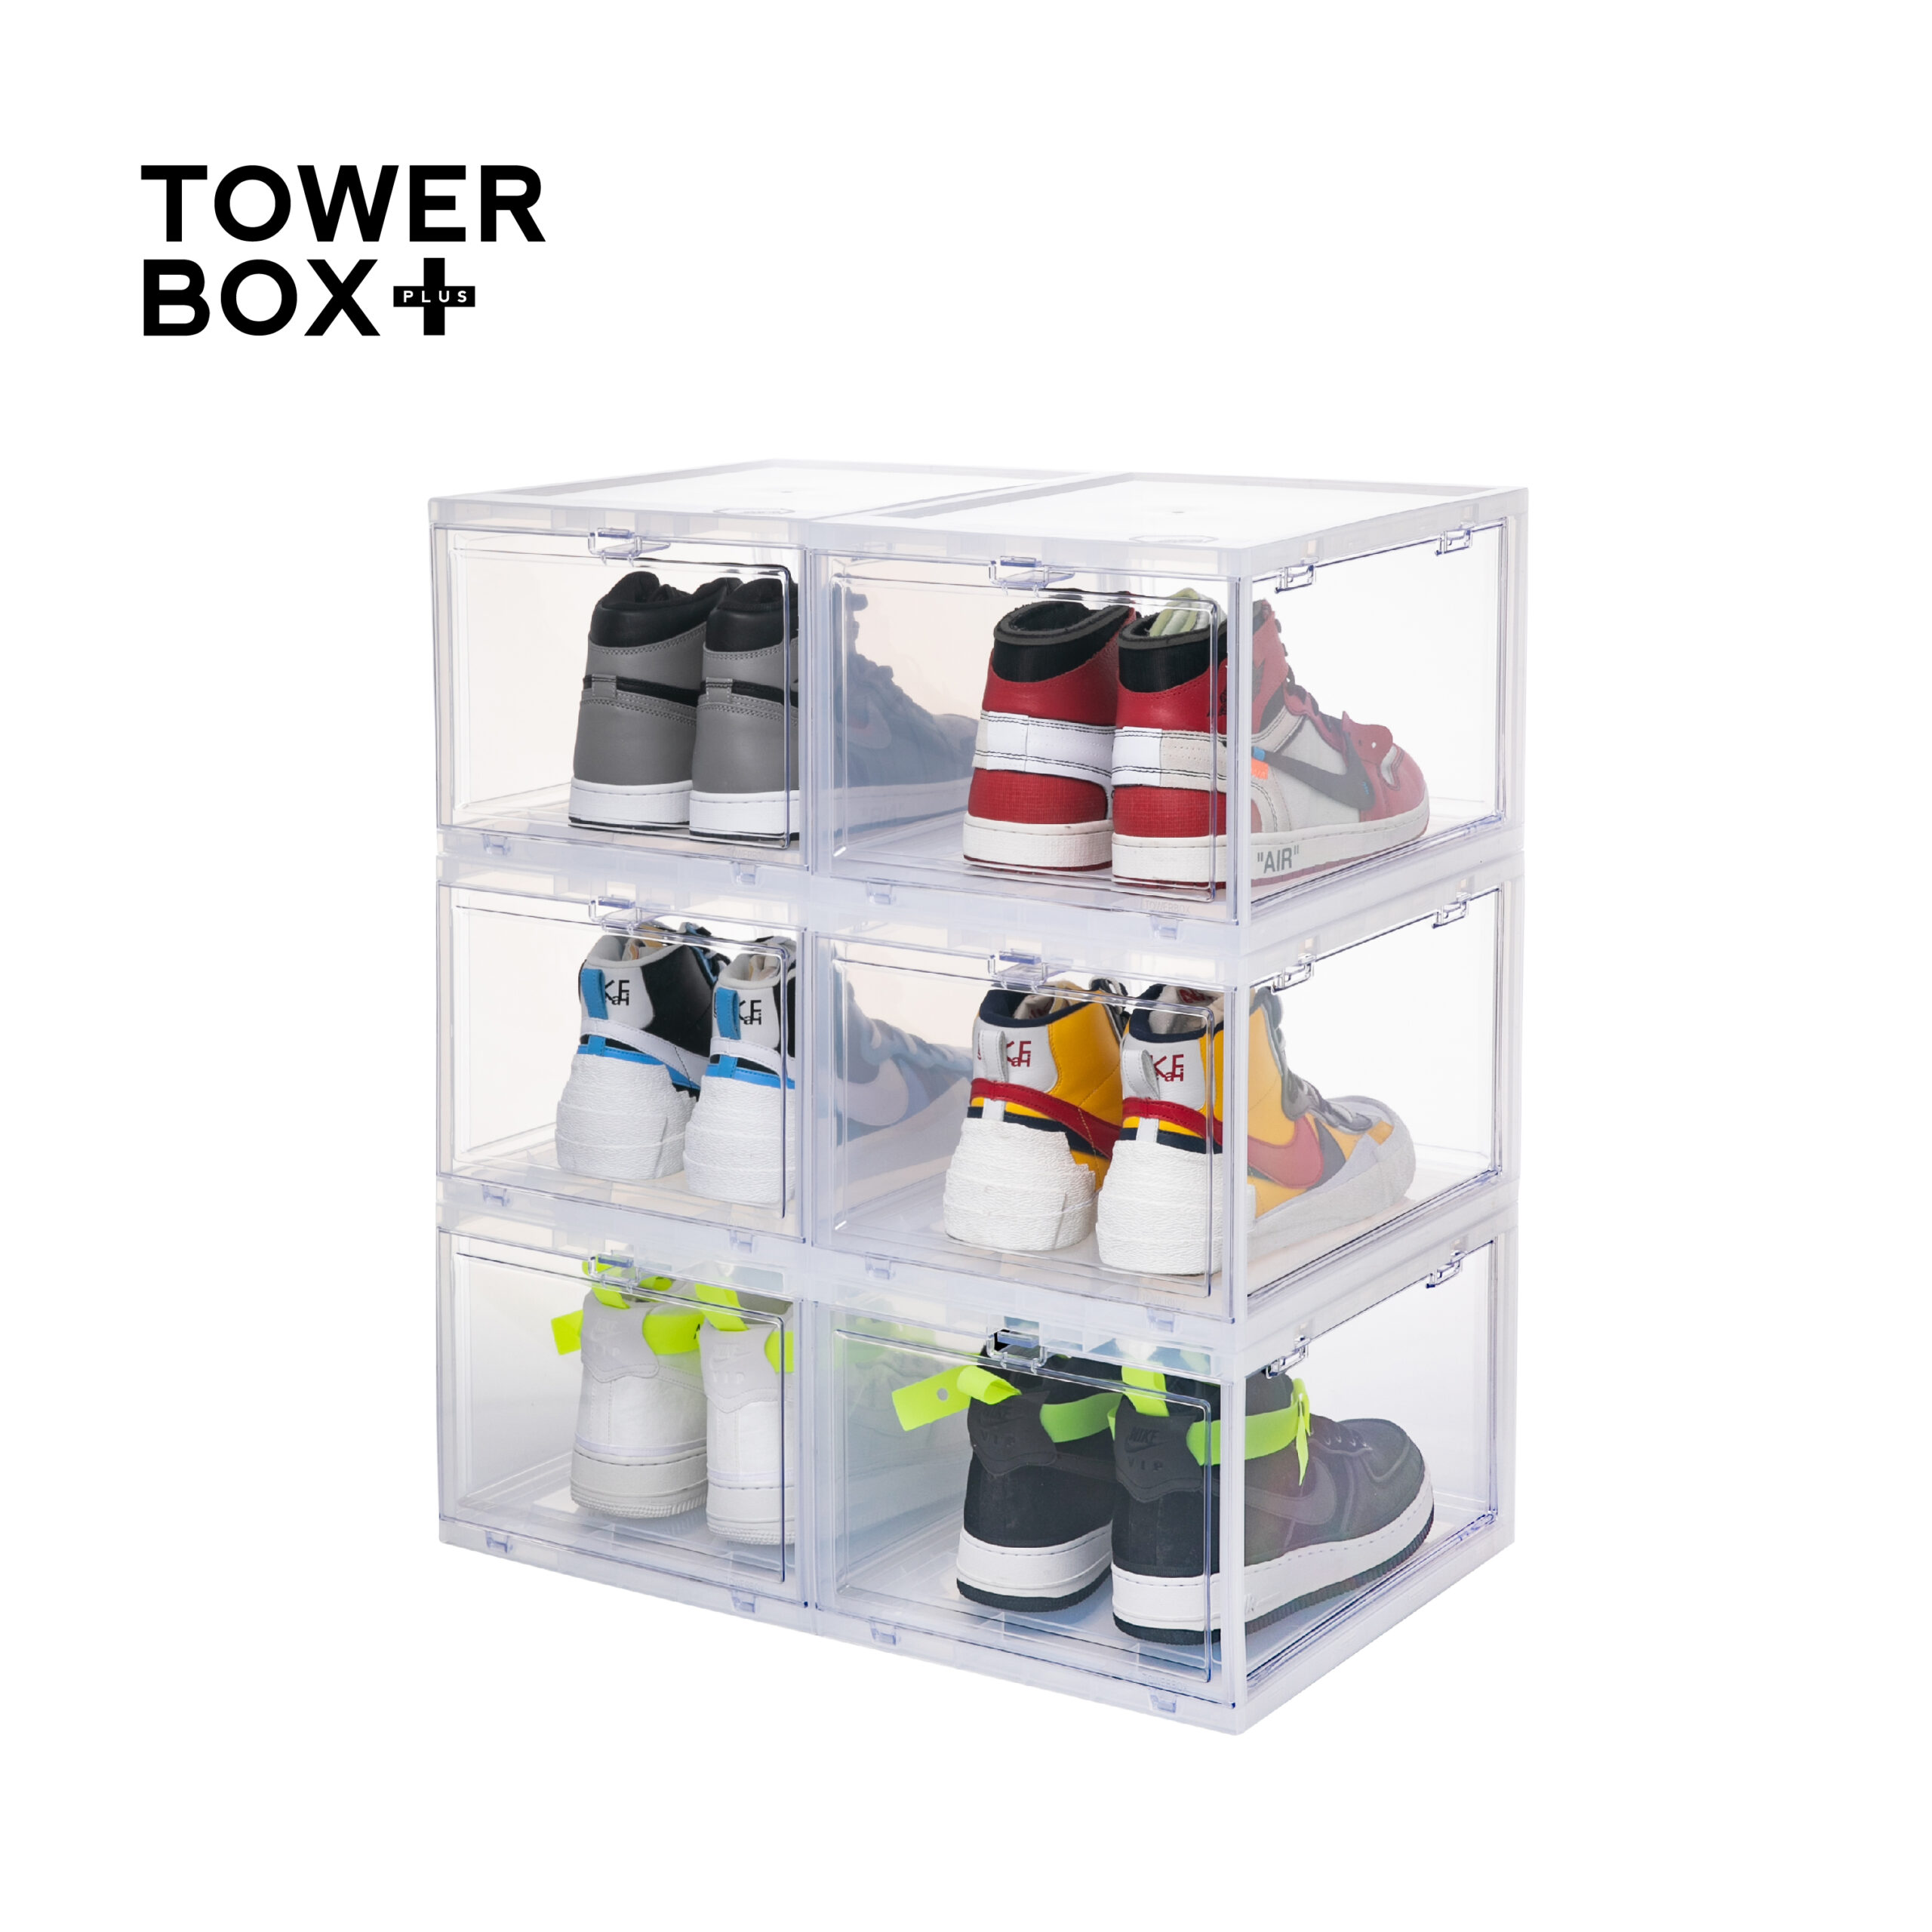 TOWER BOX PLUS (6 BOXES) + TOWER BOX 